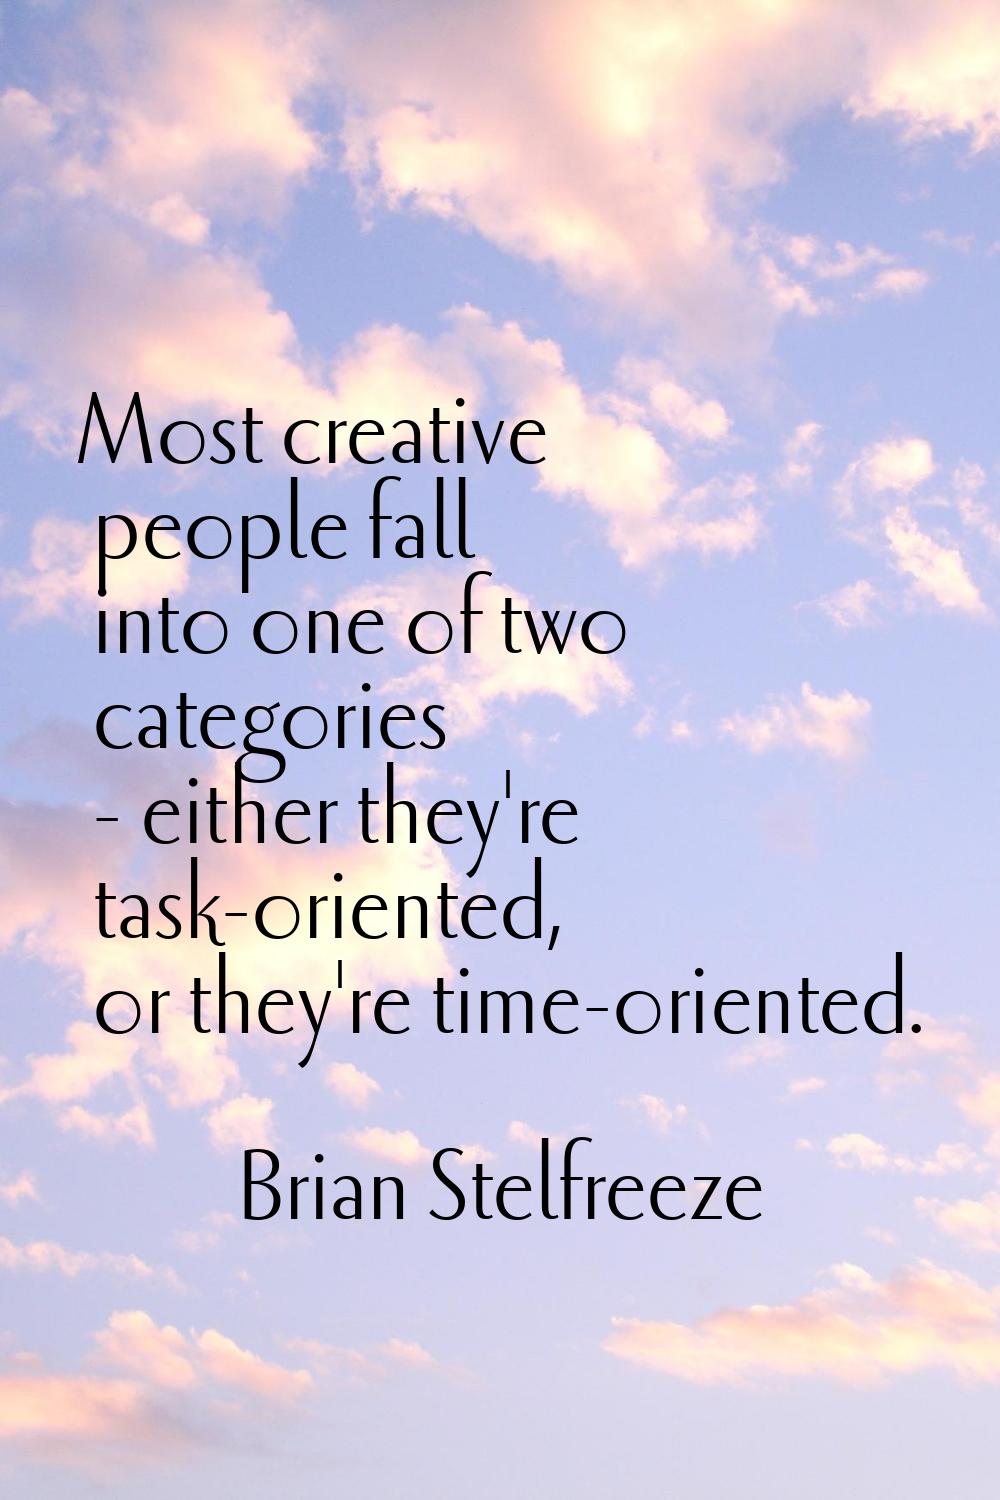 Most creative people fall into one of two categories - either they're task-oriented, or they're tim